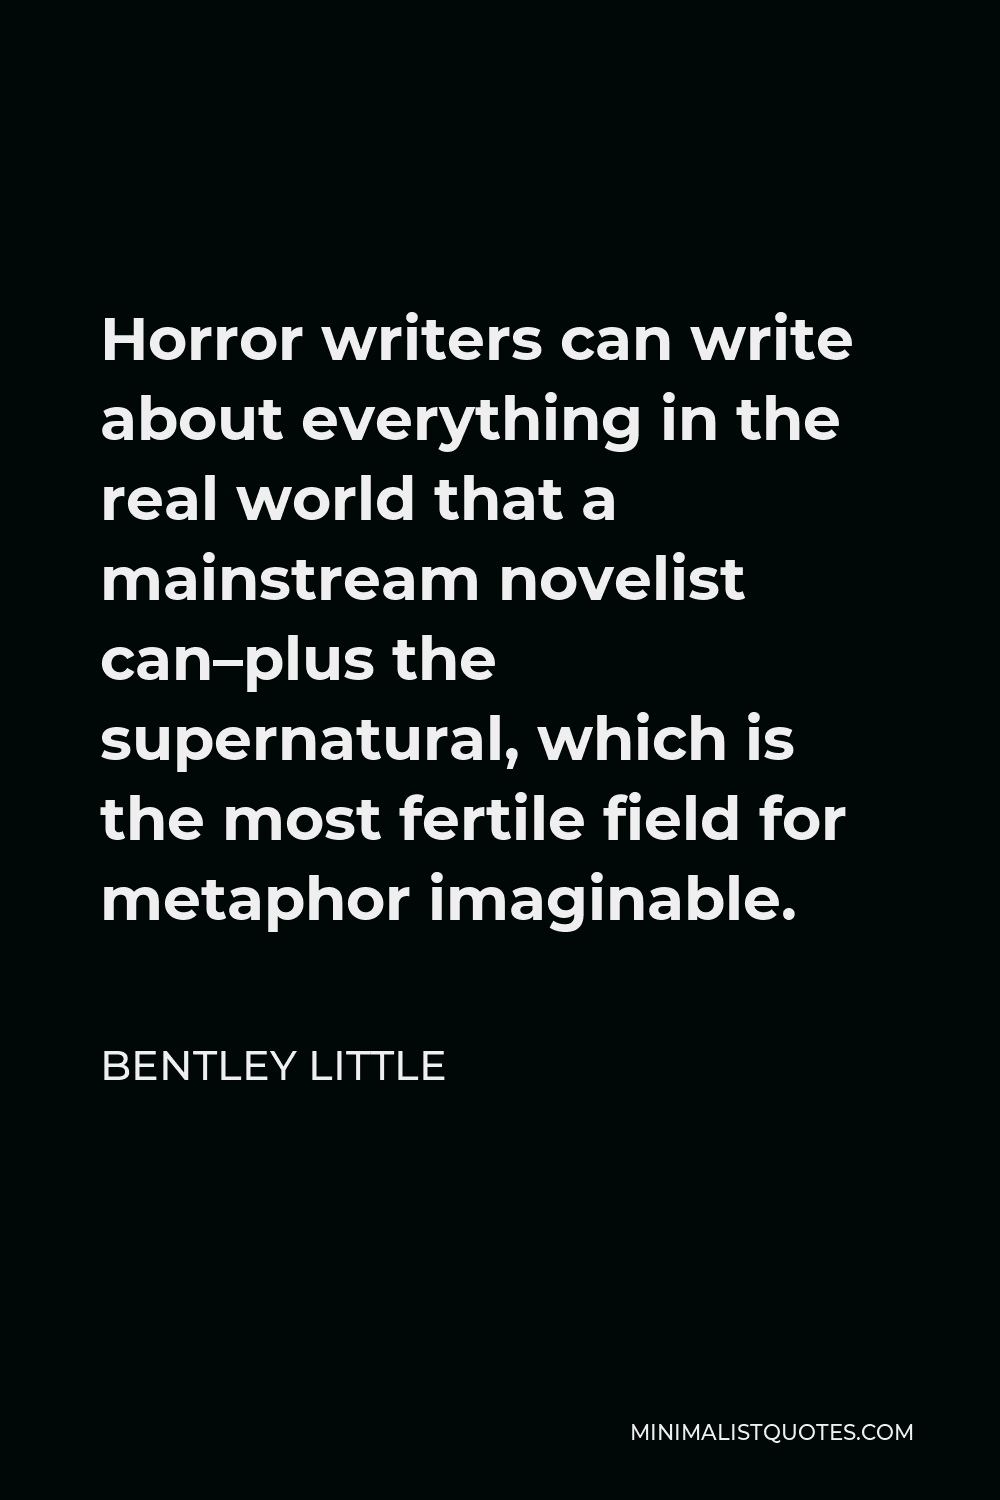 Bentley Little Quote - Horror writers can write about everything in the real world that a mainstream novelist can–plus the supernatural, which is the most fertile field for metaphor imaginable.